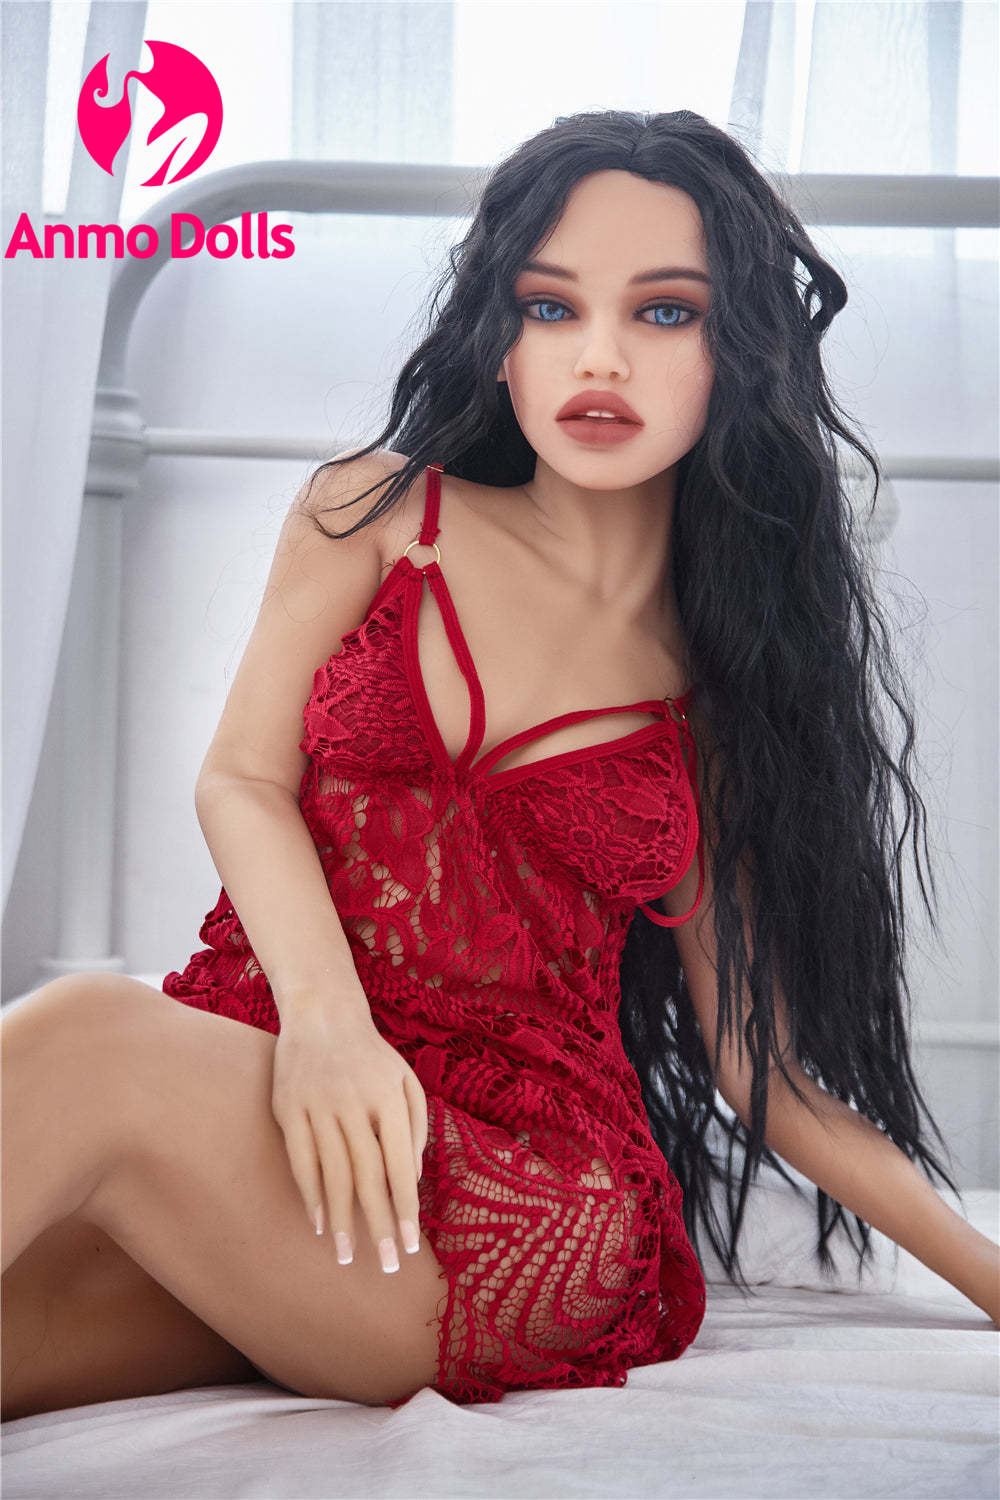 Valantena  - Valentine Day Sex doll Waiting with Hot Red lingerie - TPE Sex doll by Anmodolls